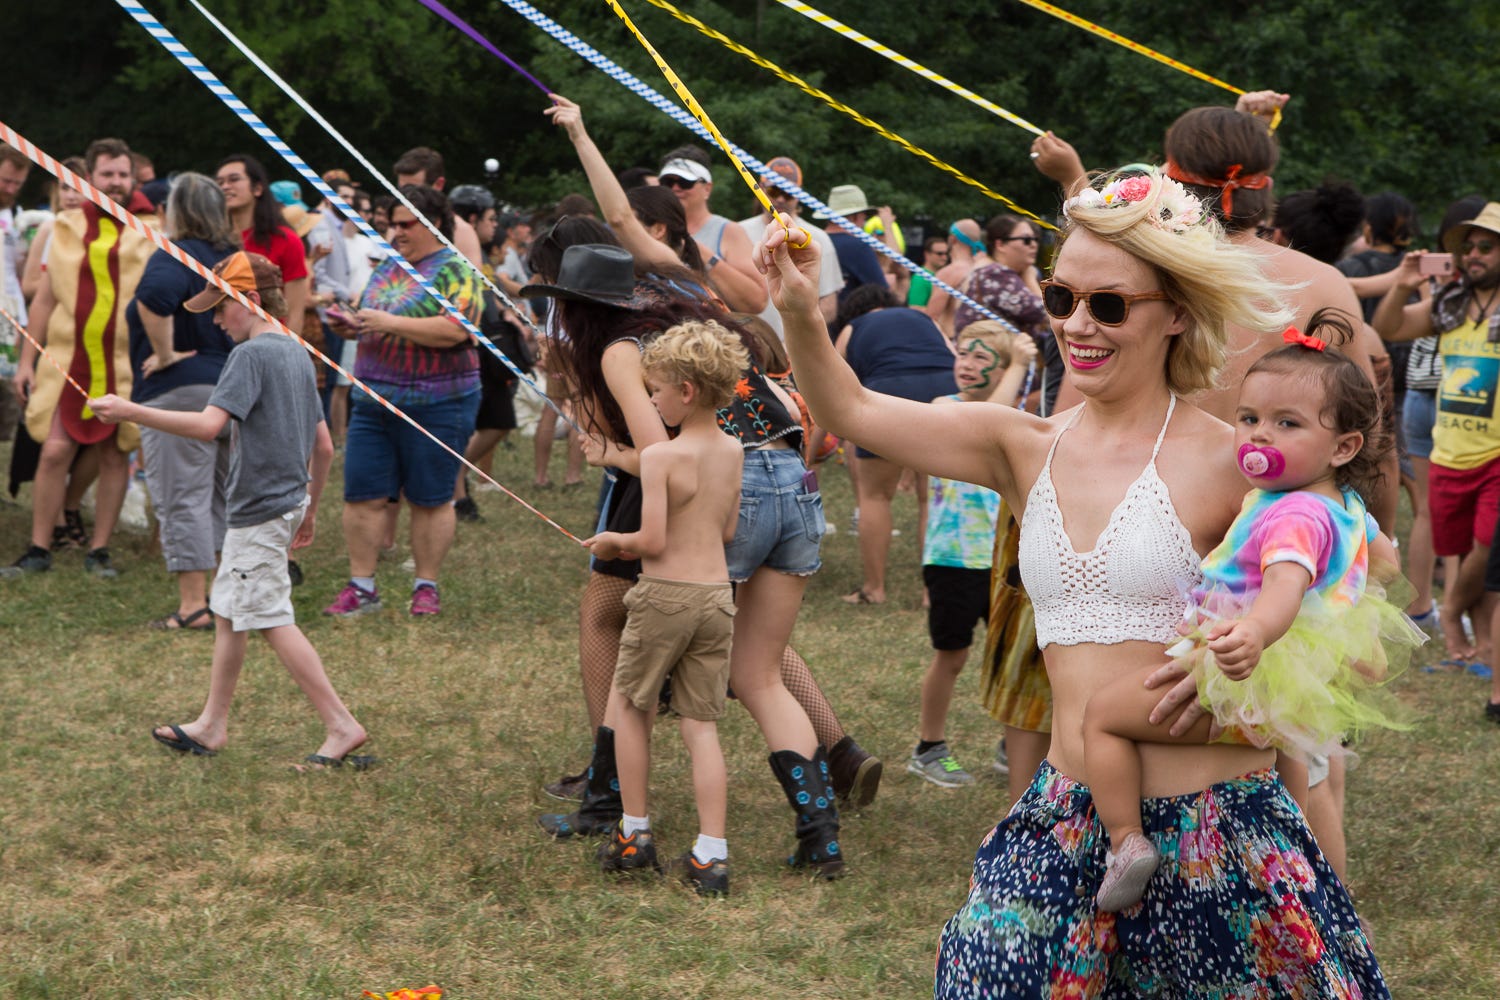 Ashley Heck and Ivy Hernandez danced around the maypole during Eeyore's Birthday in Pease Park in 2017.